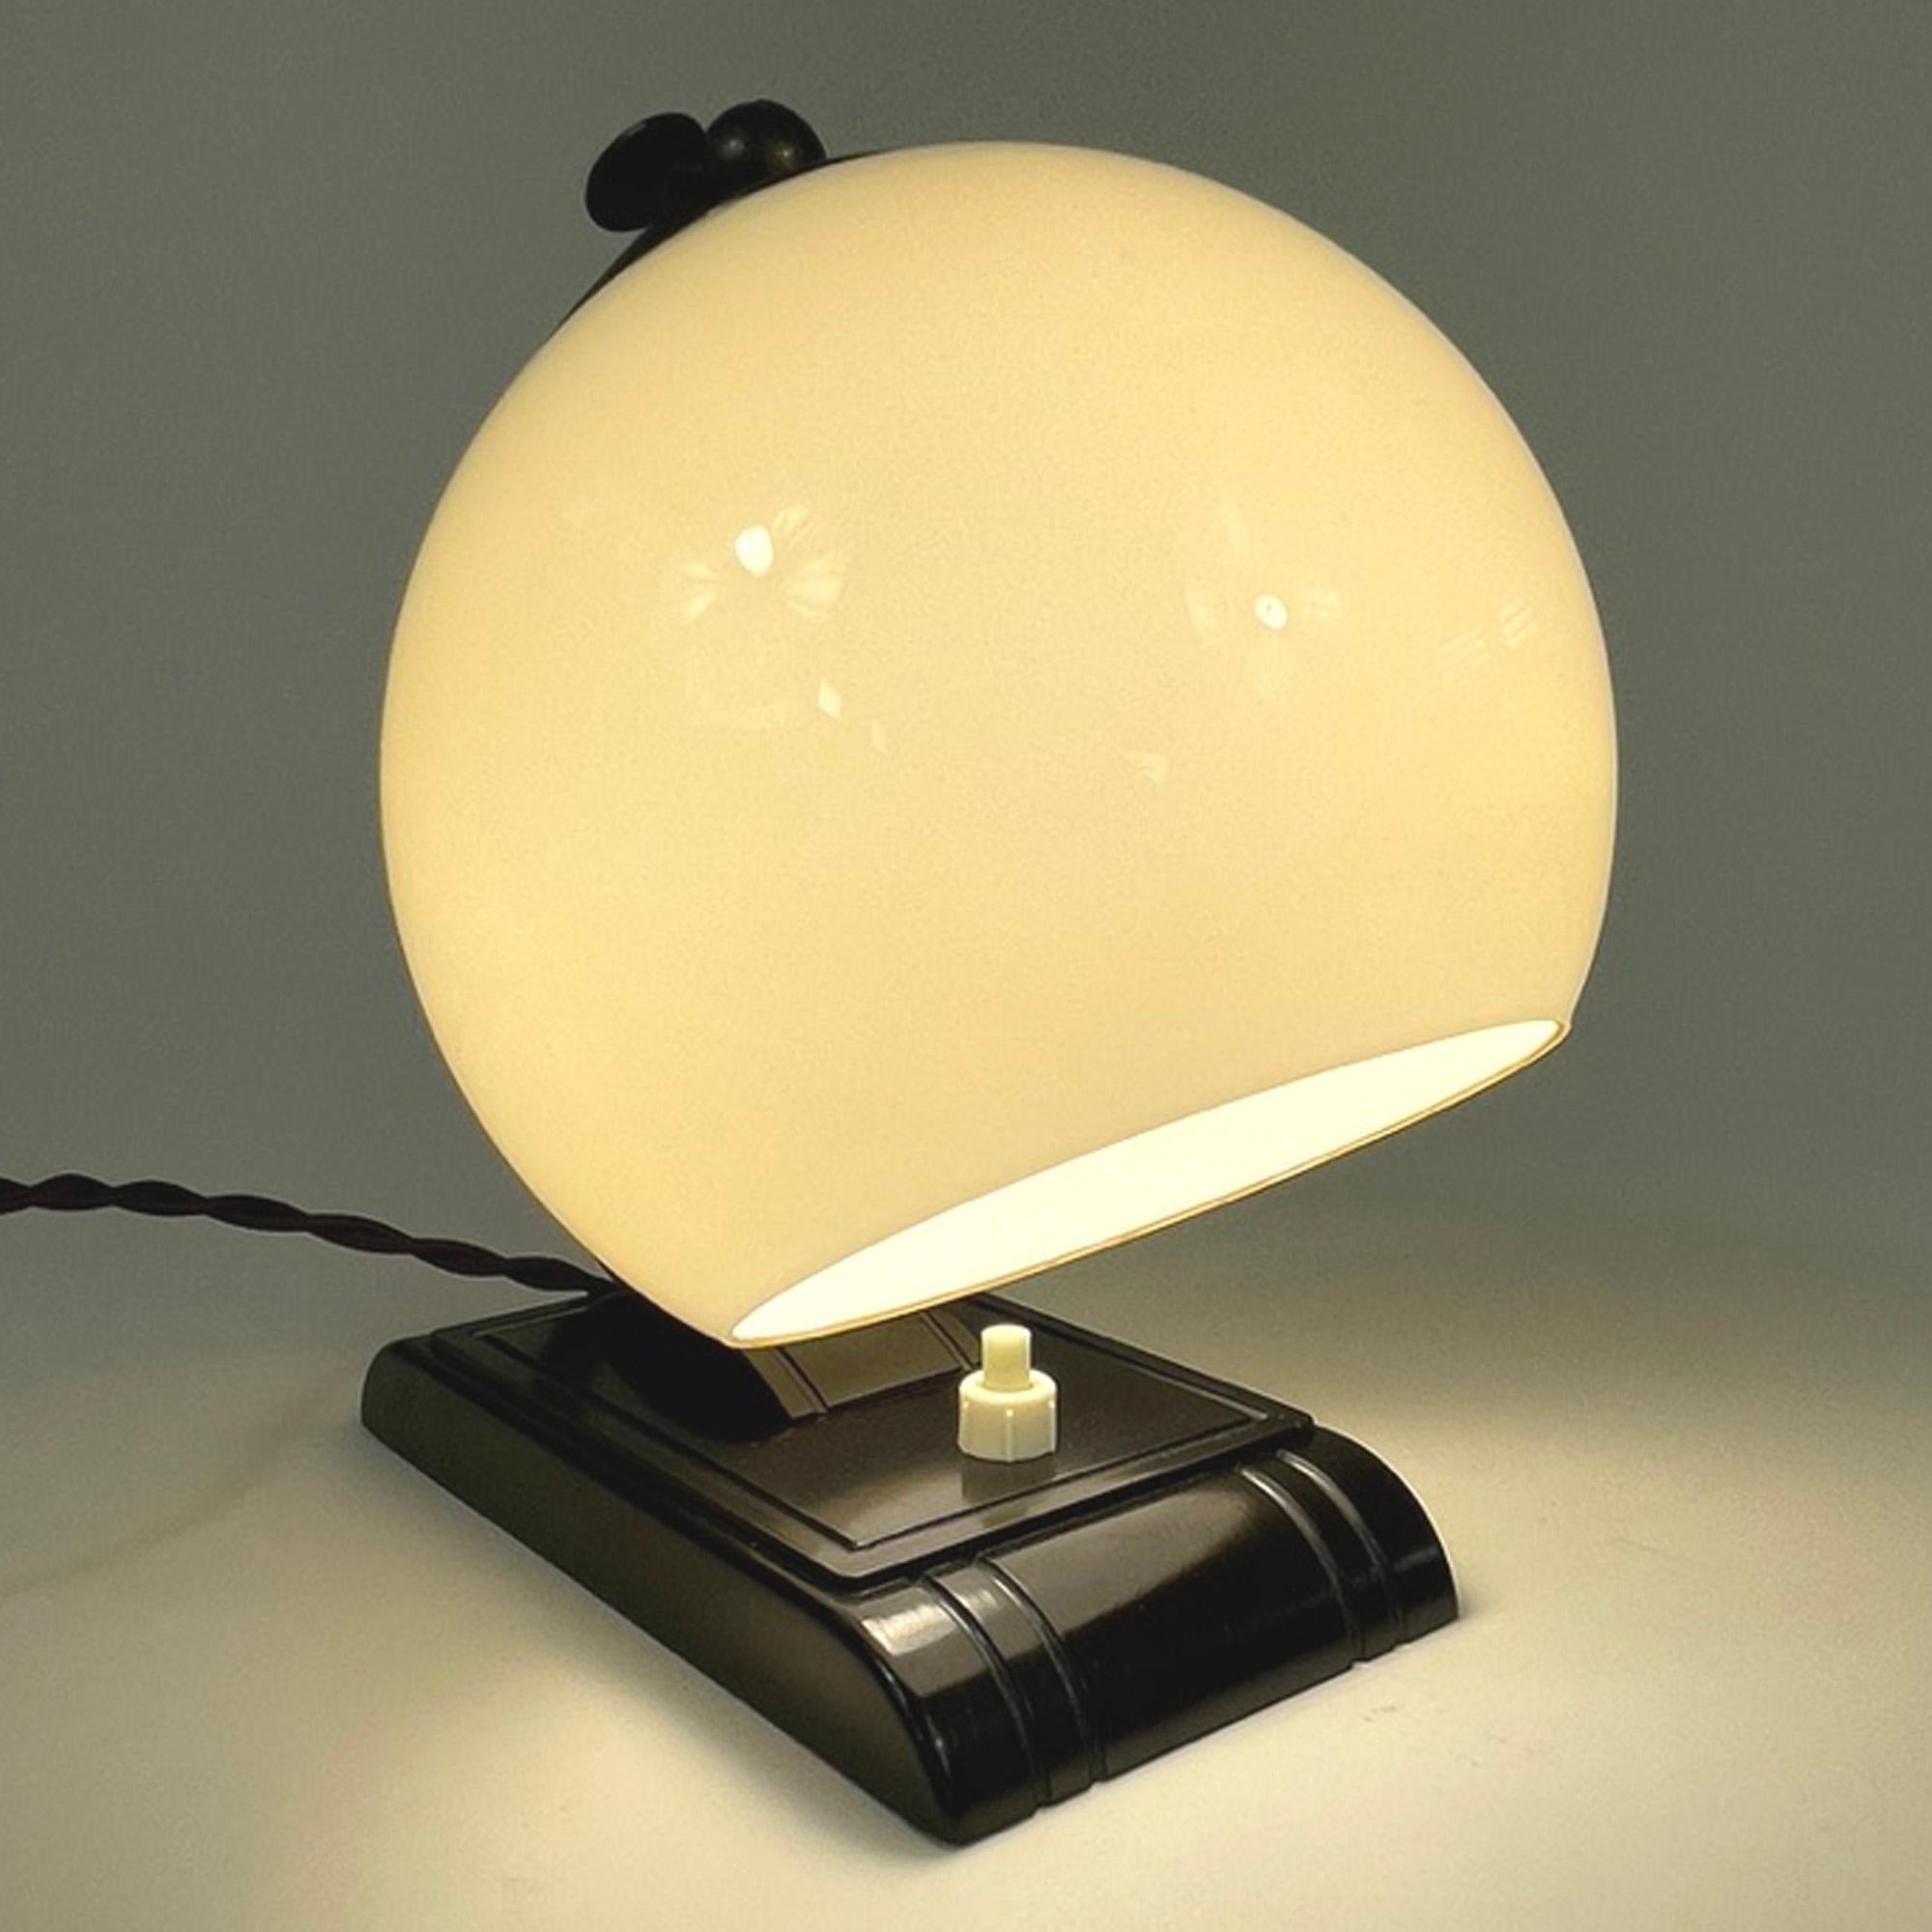 Art Deco Streamline Design Bakelite and Opaline Table Lamp, 1920s to 1930s For Sale 7